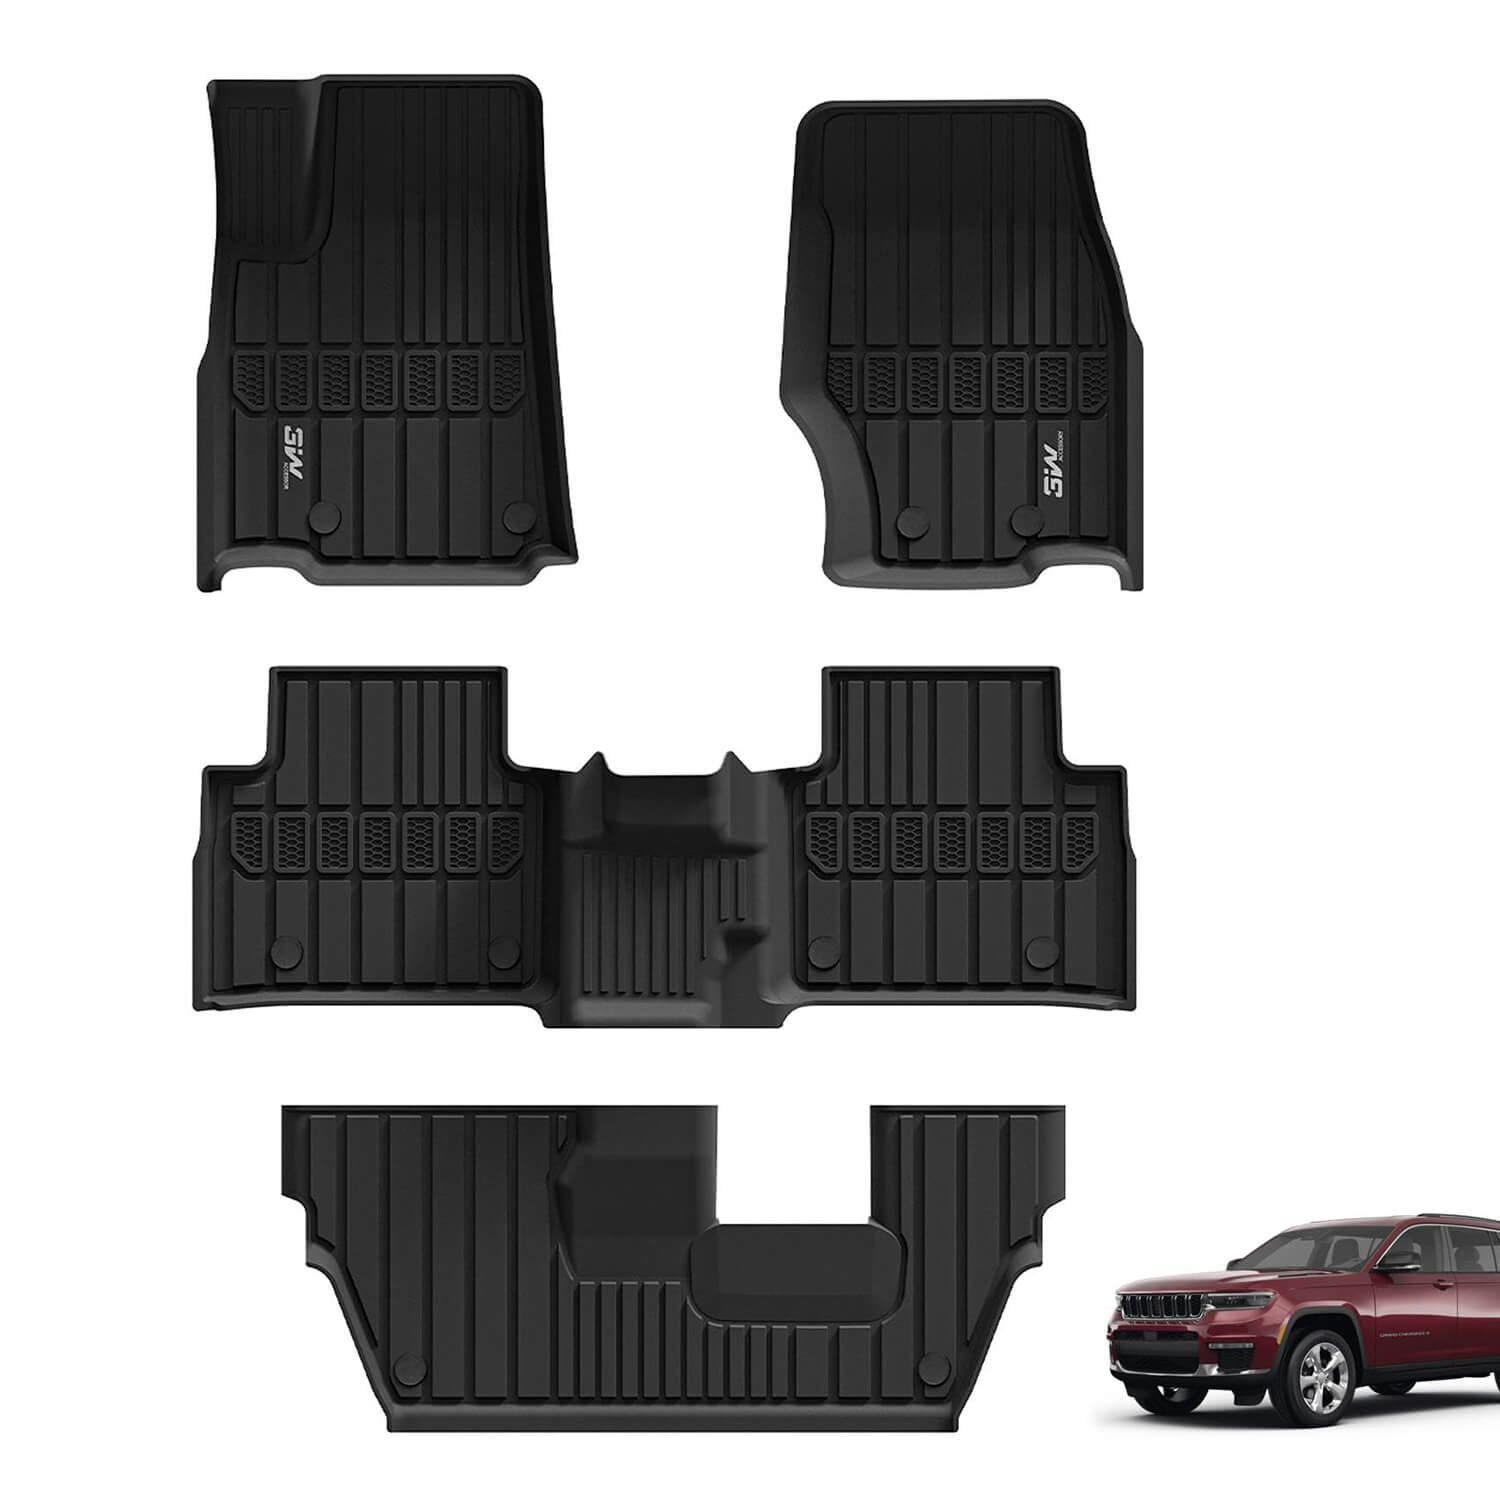 3W Jeep Grand Cherokee L 7 Seat 2021-2024 Custom Floor Mats TPE Material & All-Weather Protection Vehicles & Parts 3Wliners 2021-2024 7 Seat Grand Cherokee L 1st&2nd&3rd Row Mats